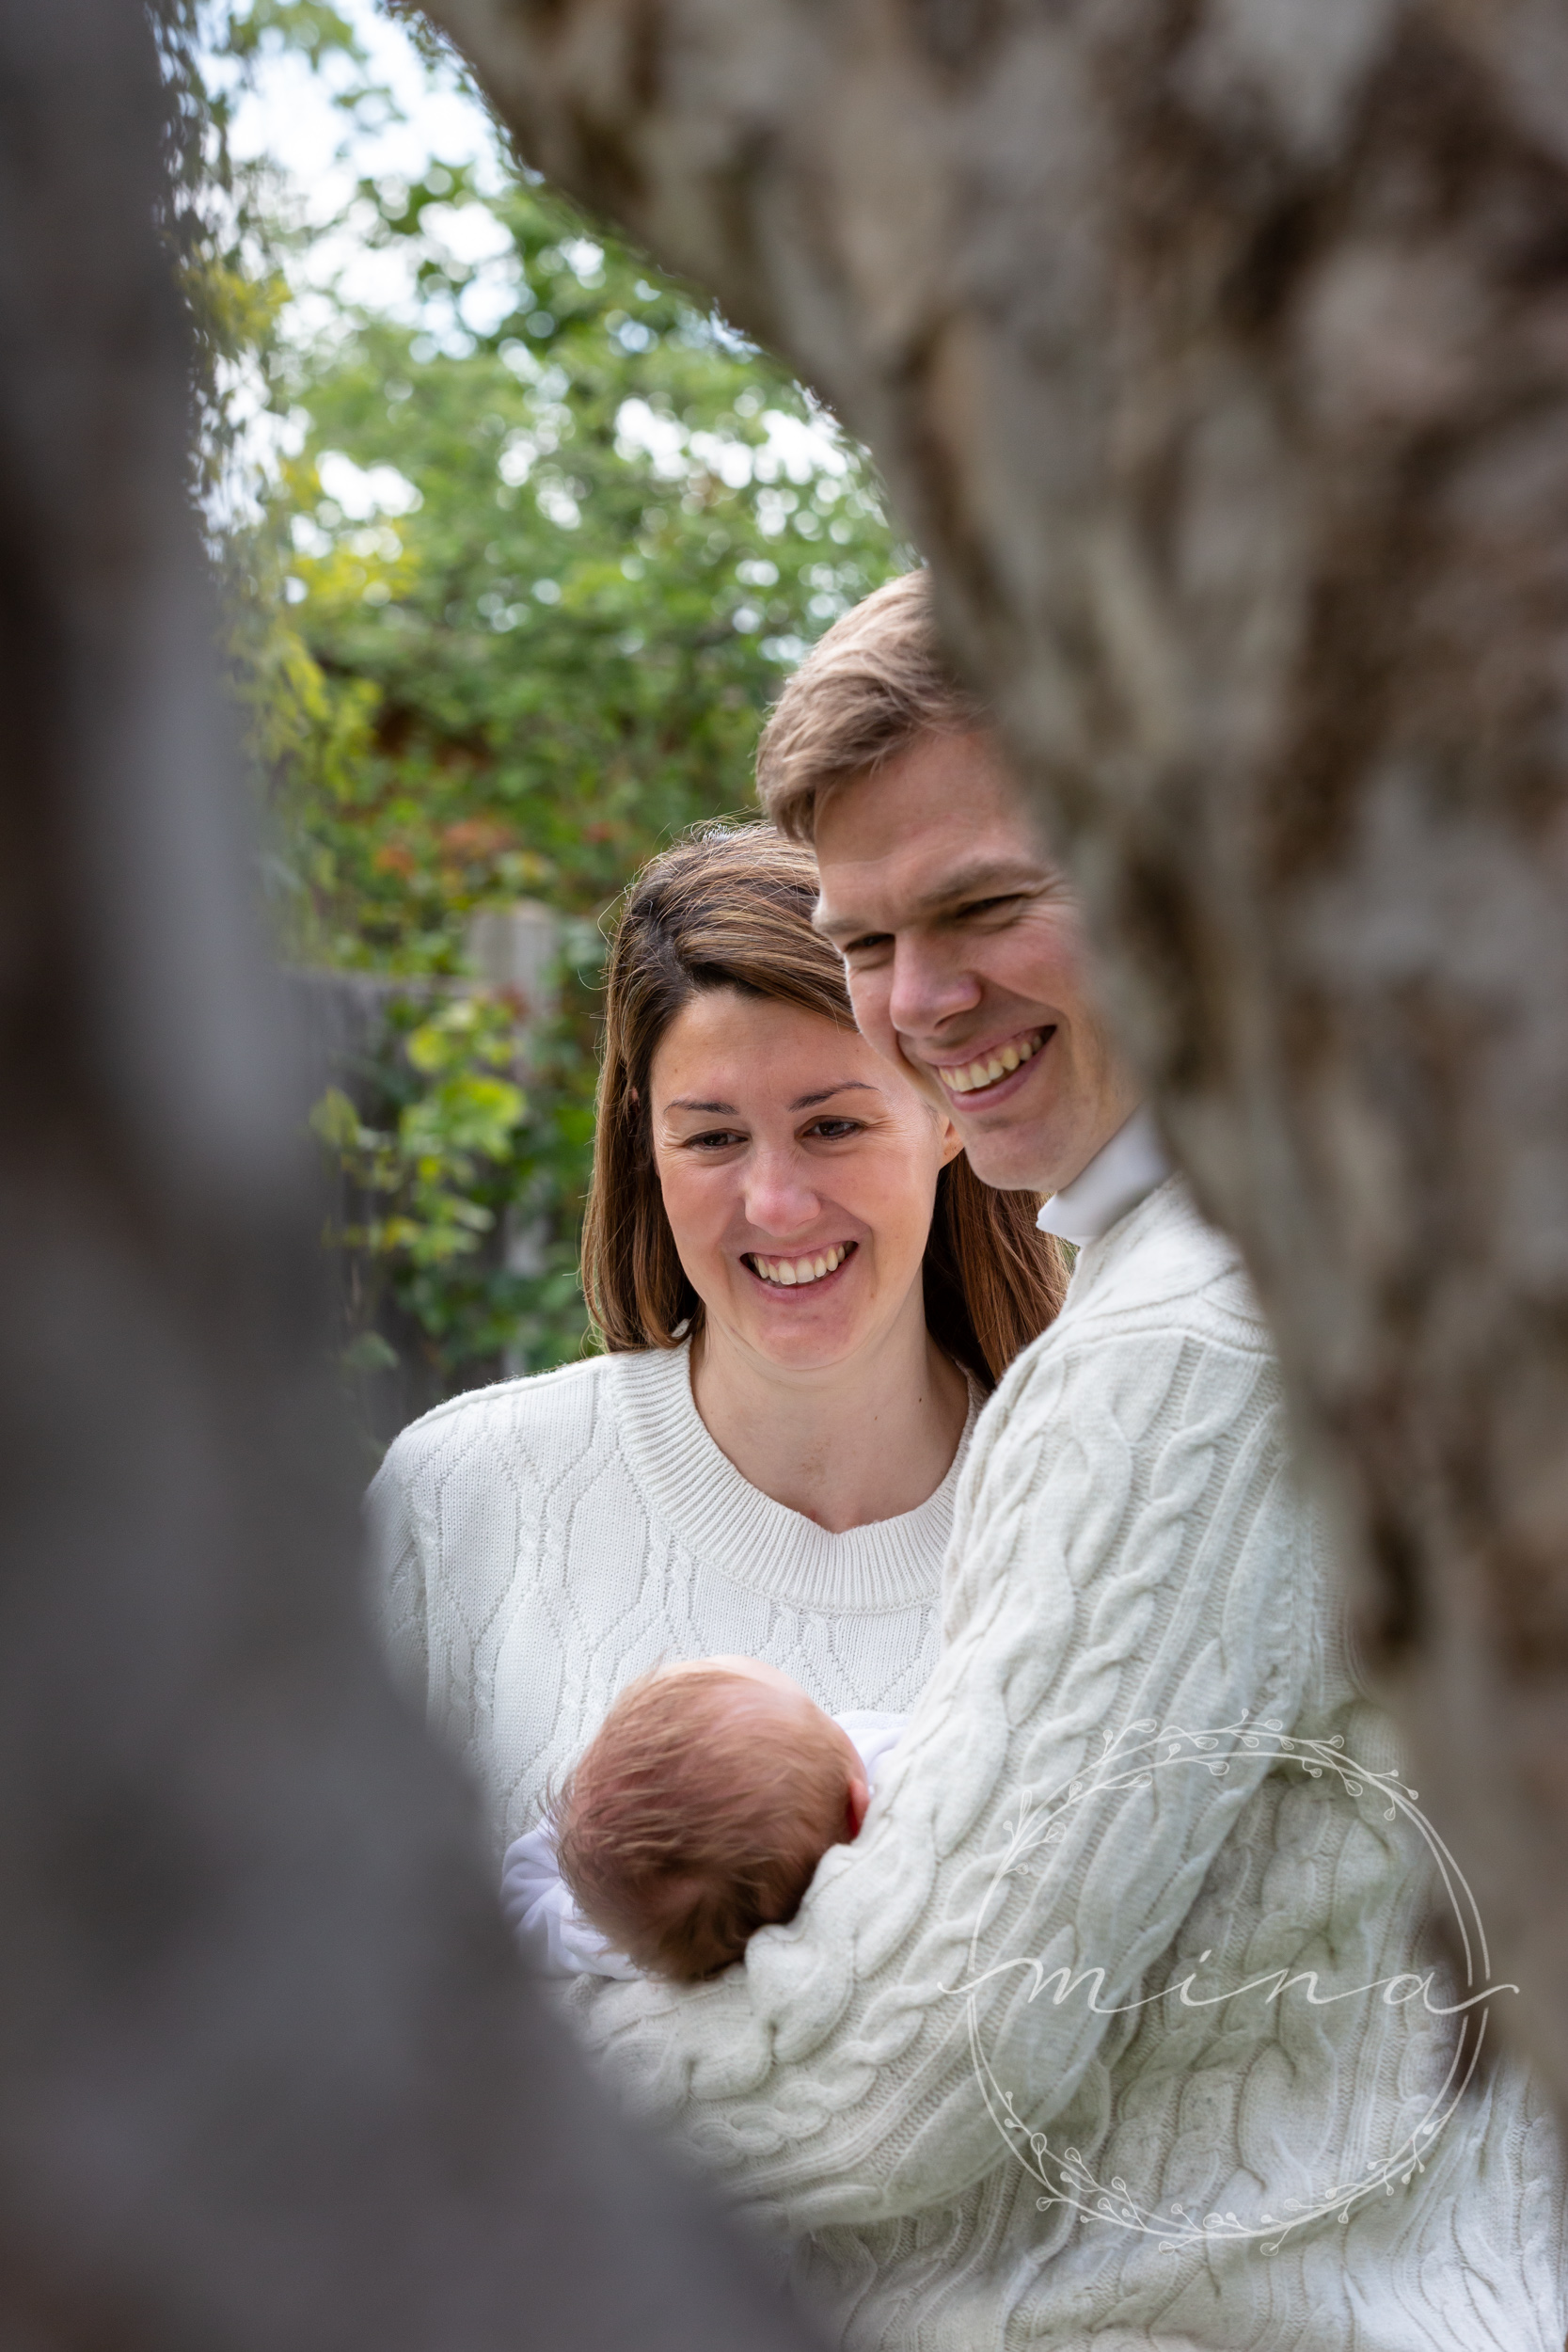 Outdoor family photography London and Surrey